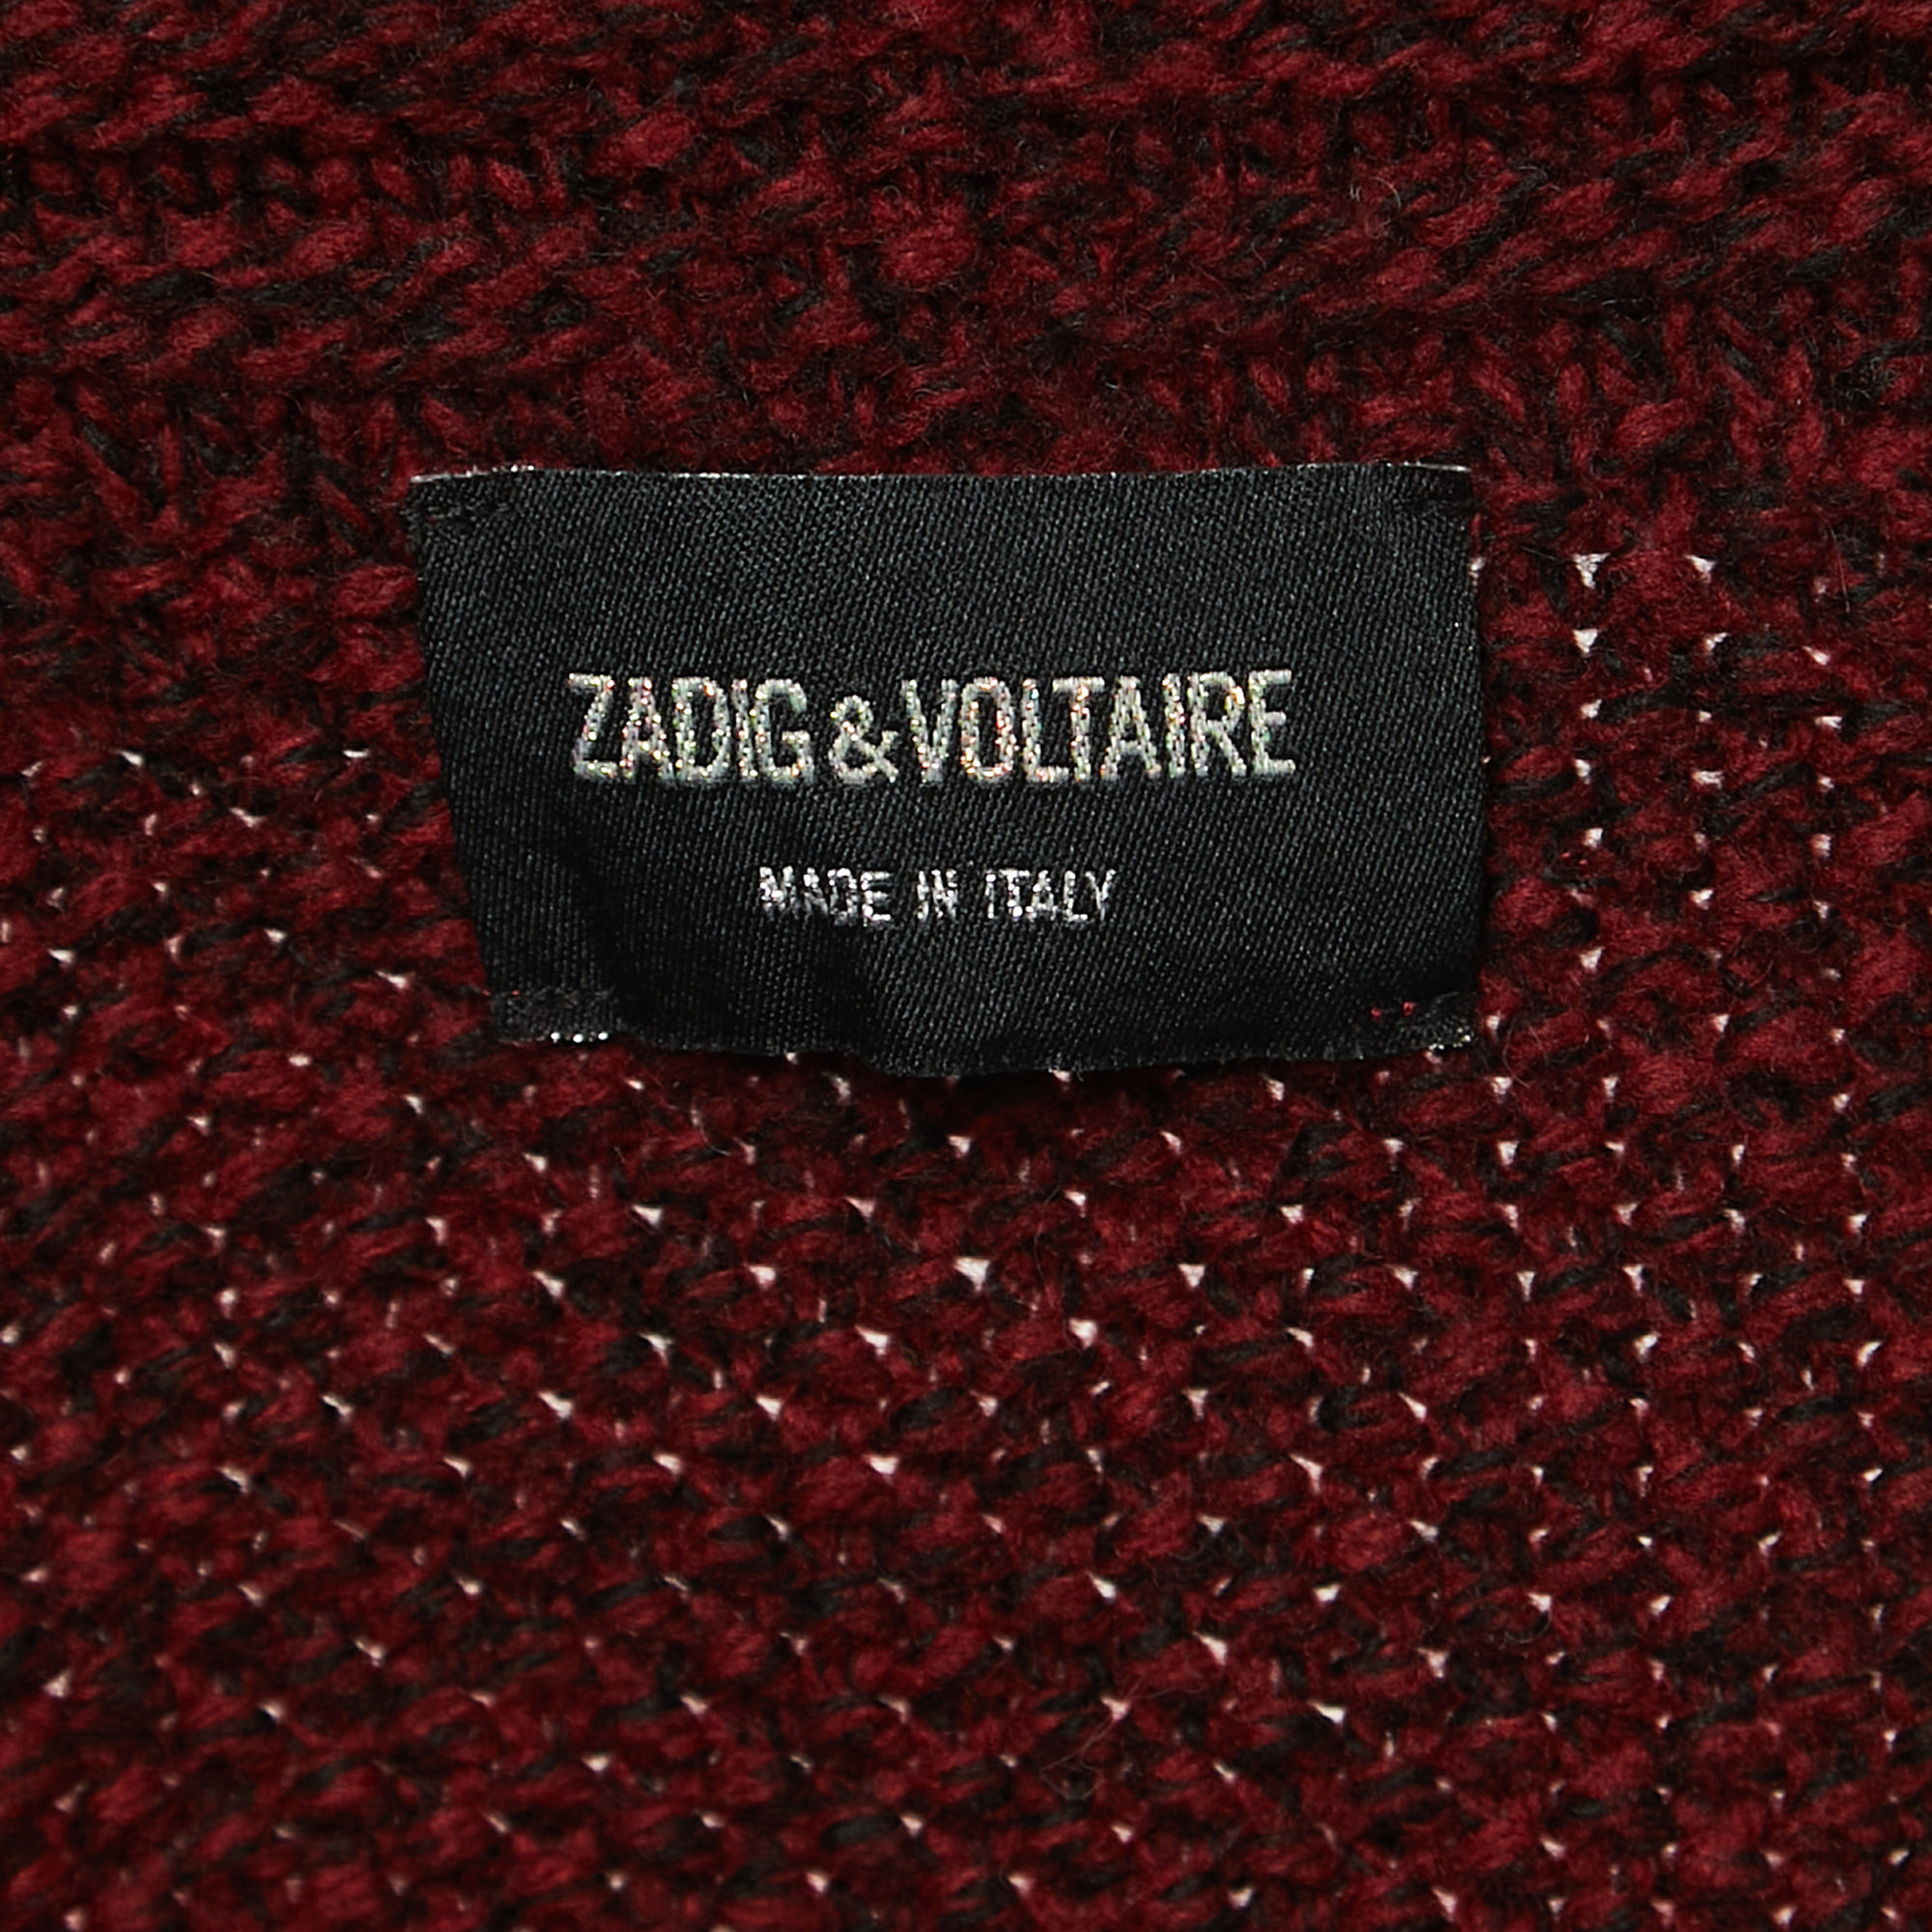 Zadig & Voltaire Burgundy Wool Knit Open Front Cardigan M/L